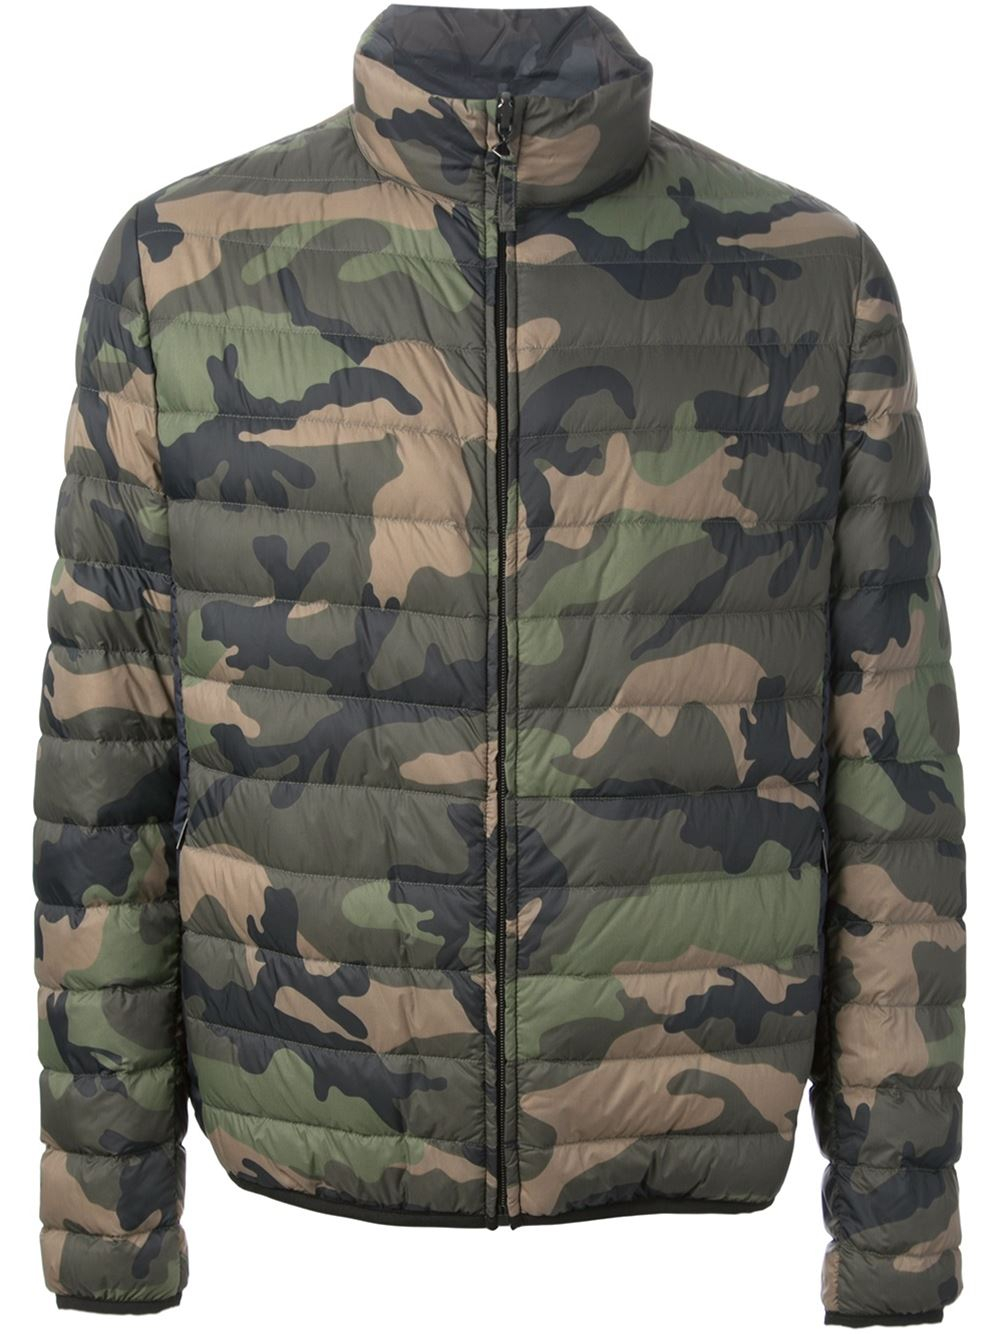 Lyst - Valentino Camouflage Padded Jacket in Green for Men